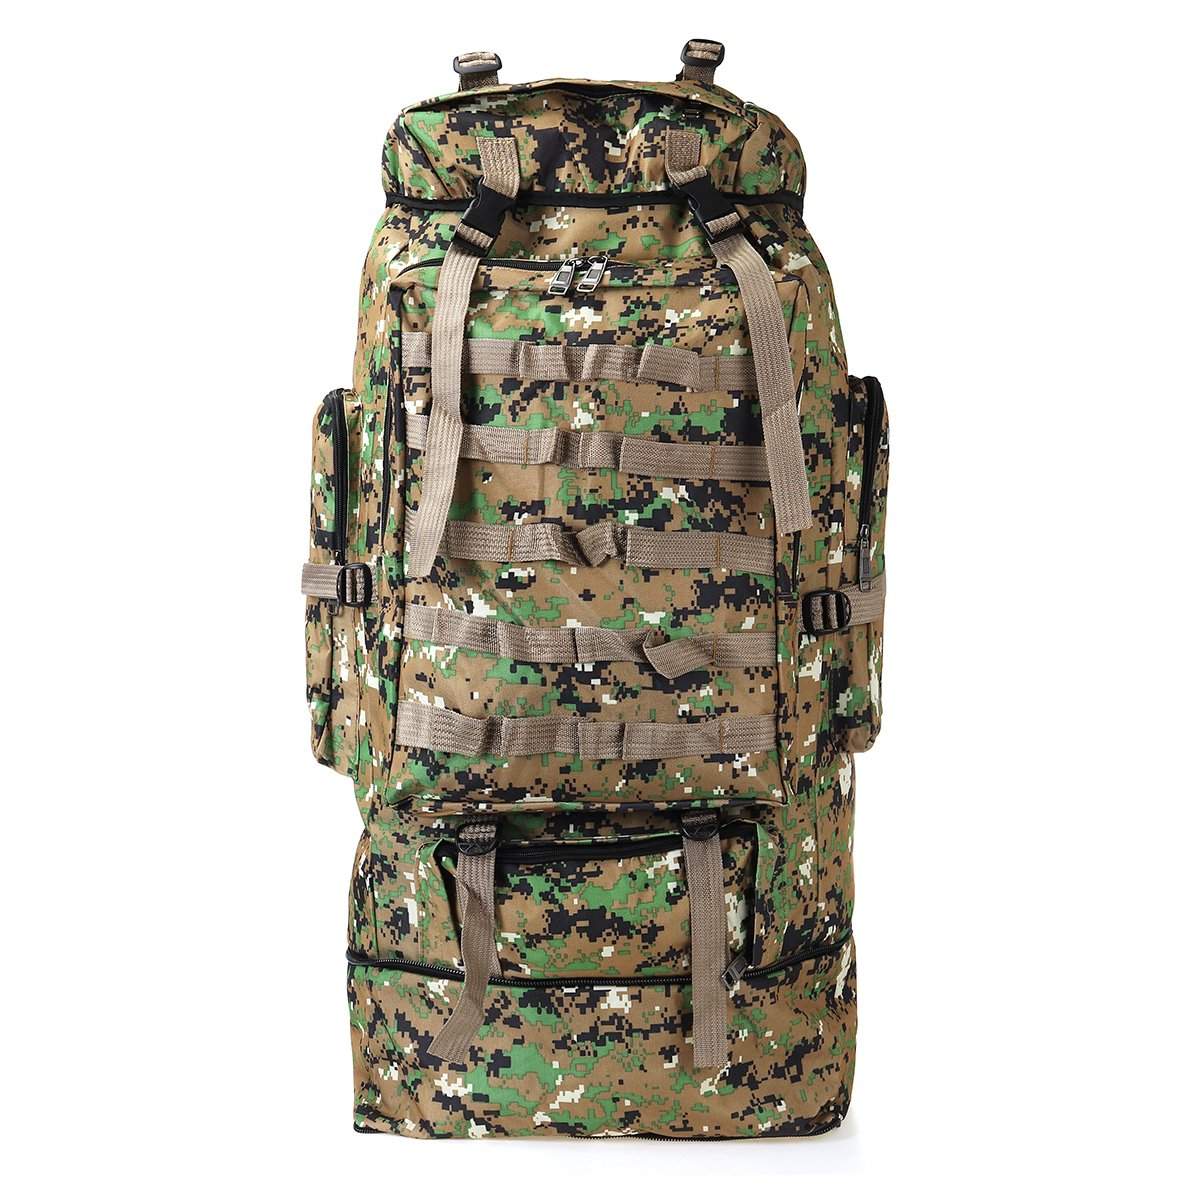  Military Matter 70L Military Tactical Waterproof Backpack | The Best CS Tactical Clothing Store